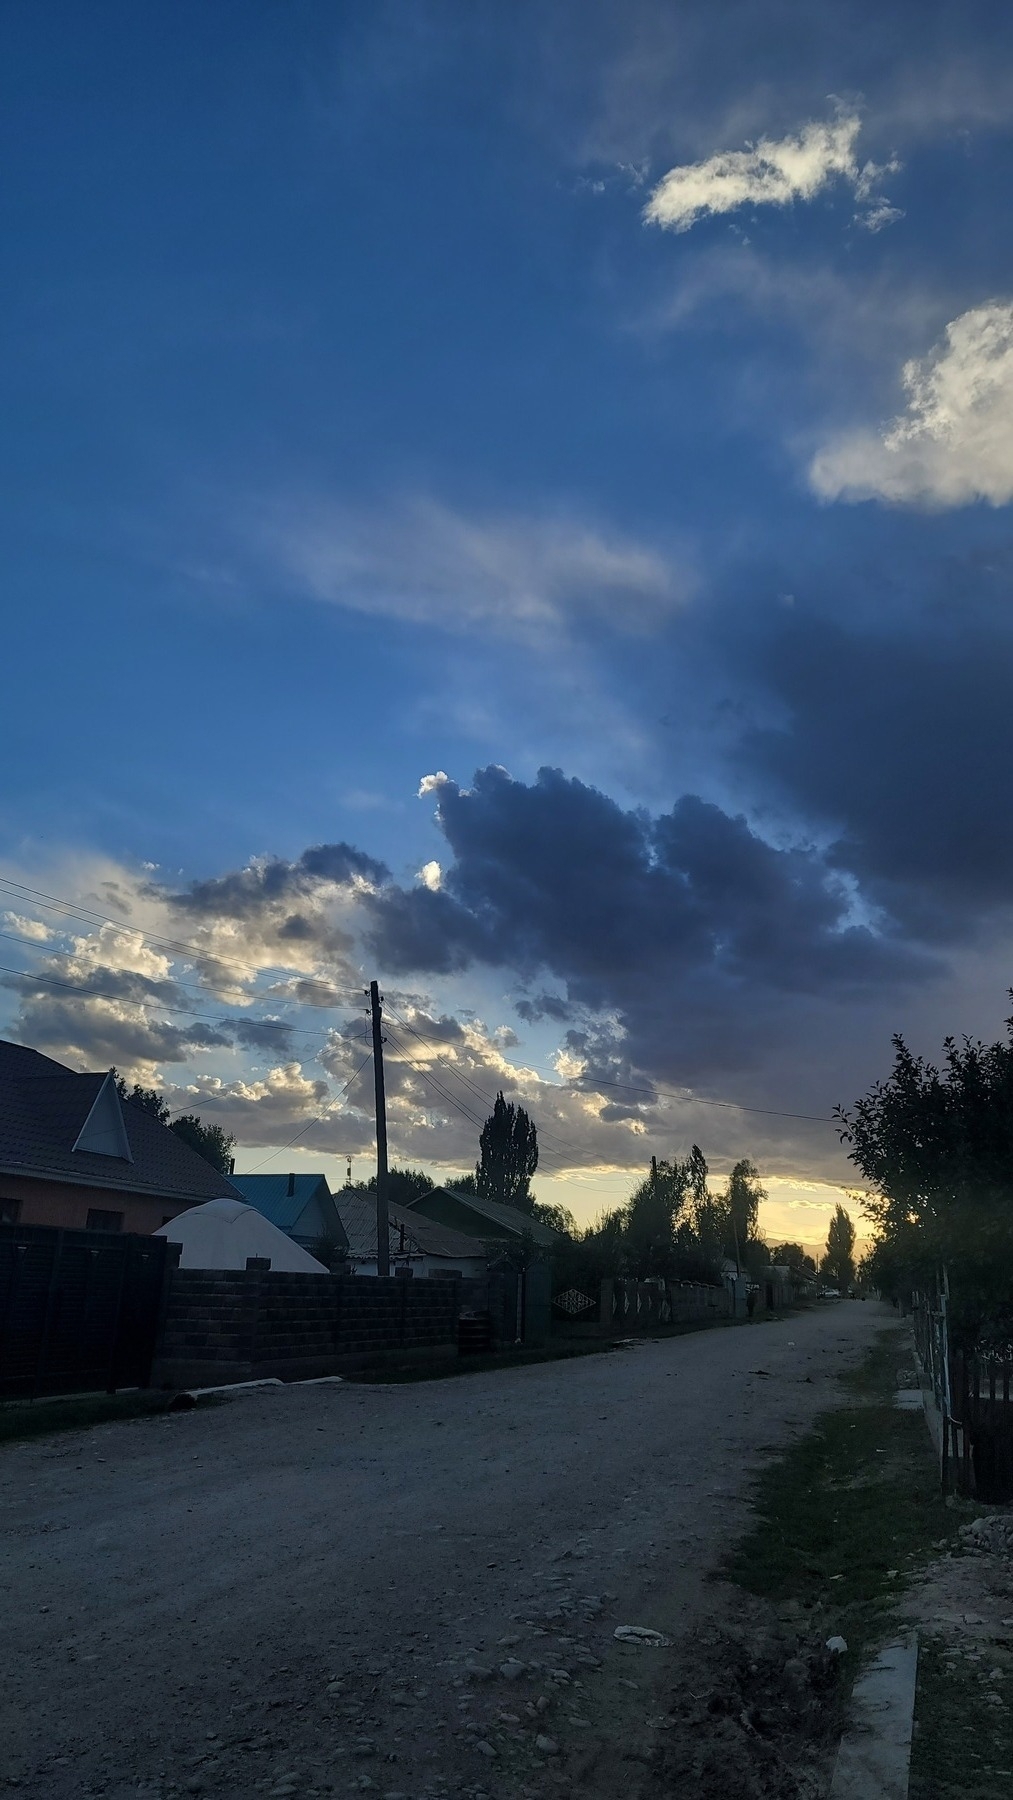 dark clouds in front of a bright sun, shortly before sunset. street with houses extending into the distance